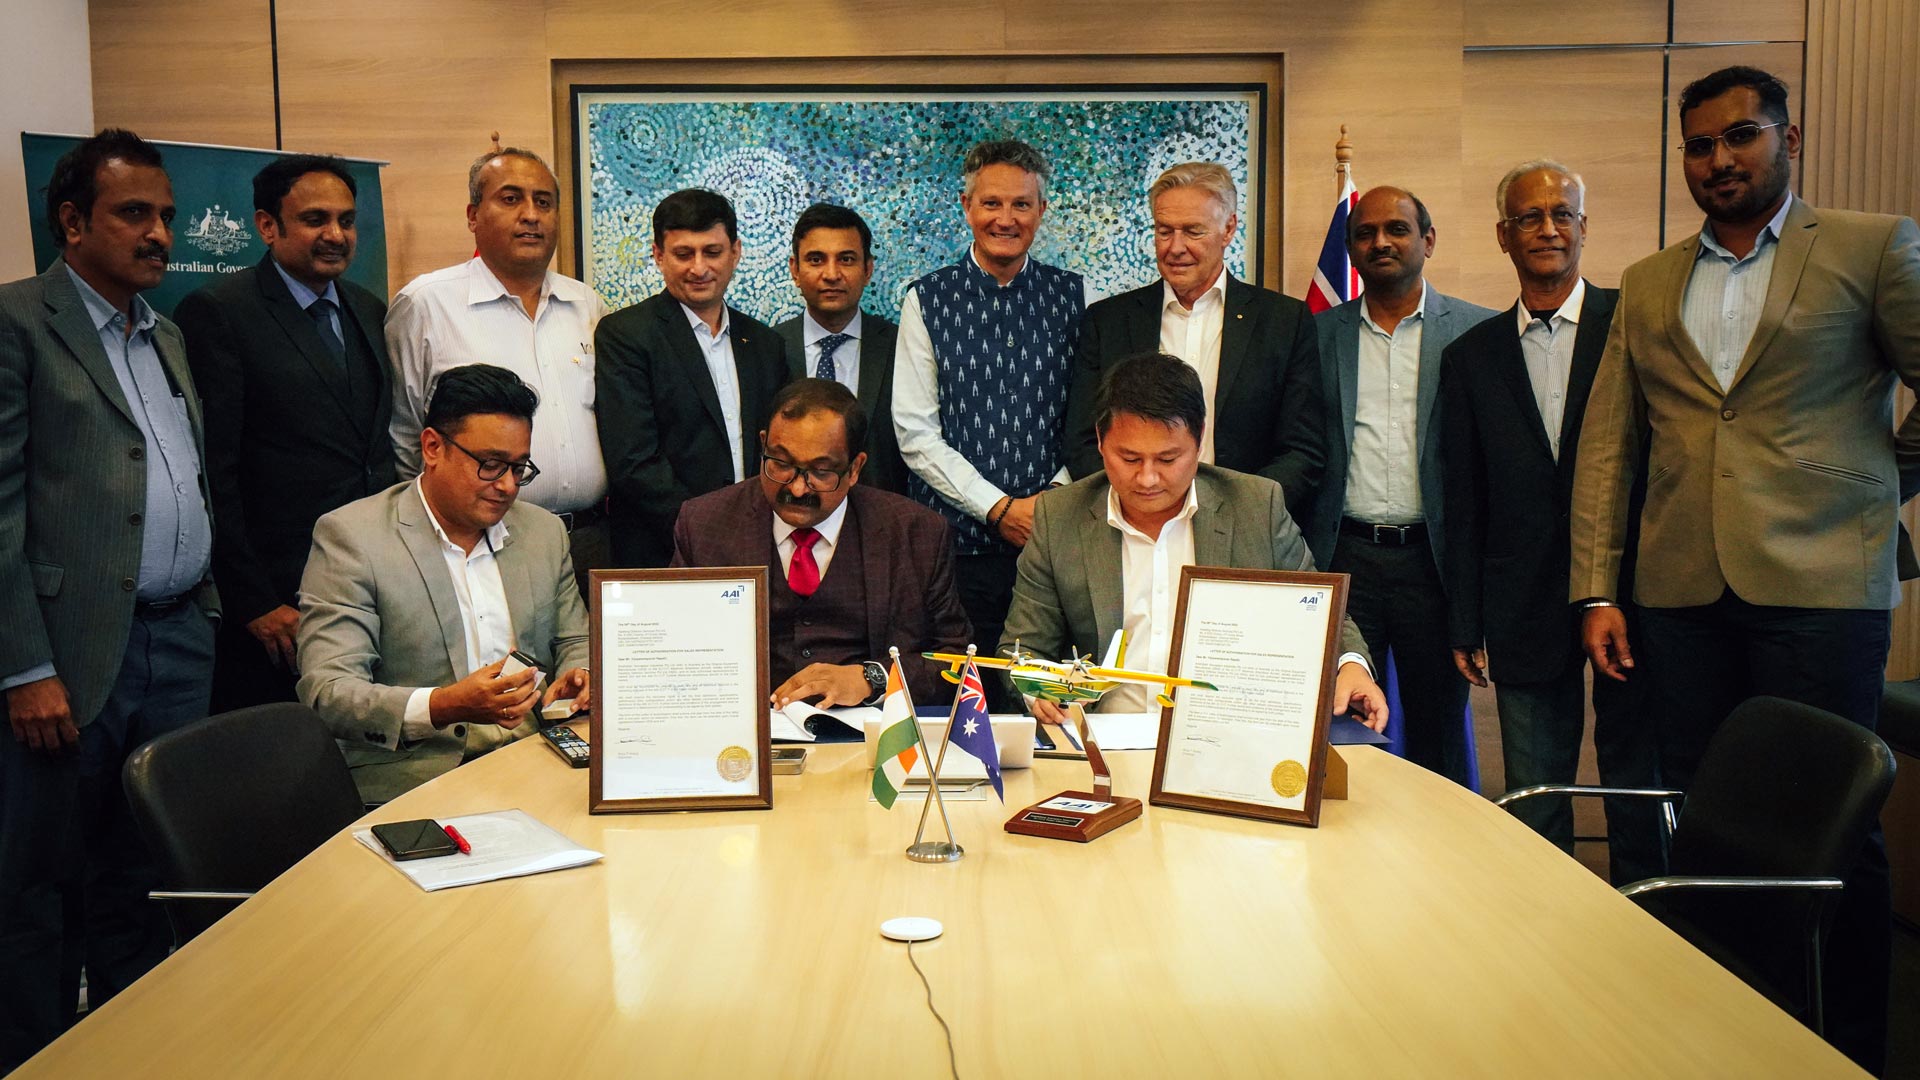 Hawking Defence Services, a Chennai-based Def-Tech Company operating in the field of Defence and Aerospace signed a procurement cum partnership agreement with Australia-based Amphibian Aerospace Industries, manufacturers of "Albatross" amphibious aircrafts. Amphibian Aerospace is based out of Darwin, Australia. “Albatross” is a 28-seater Amphibious Aircraft capable of landing and taking off from land, water, and snow. The agreement includes the confirmation of procurement of a single aircraft by Hawking Defence Services by Hawking Defence Services